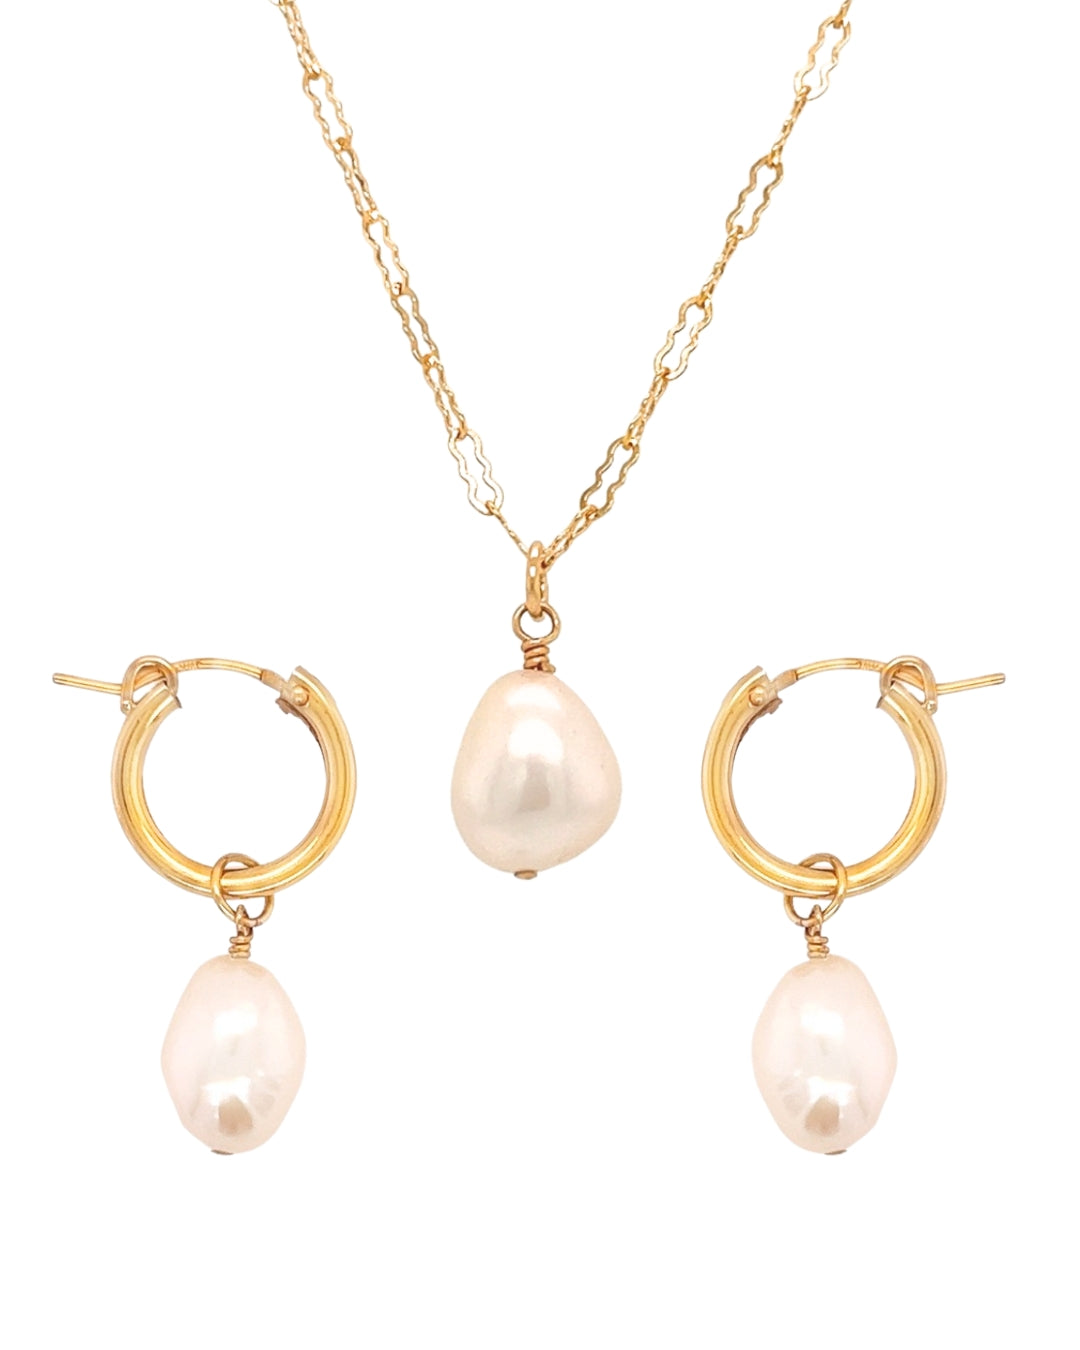 Gold Moondrop Pearl Necklace and Hoop Earrings set